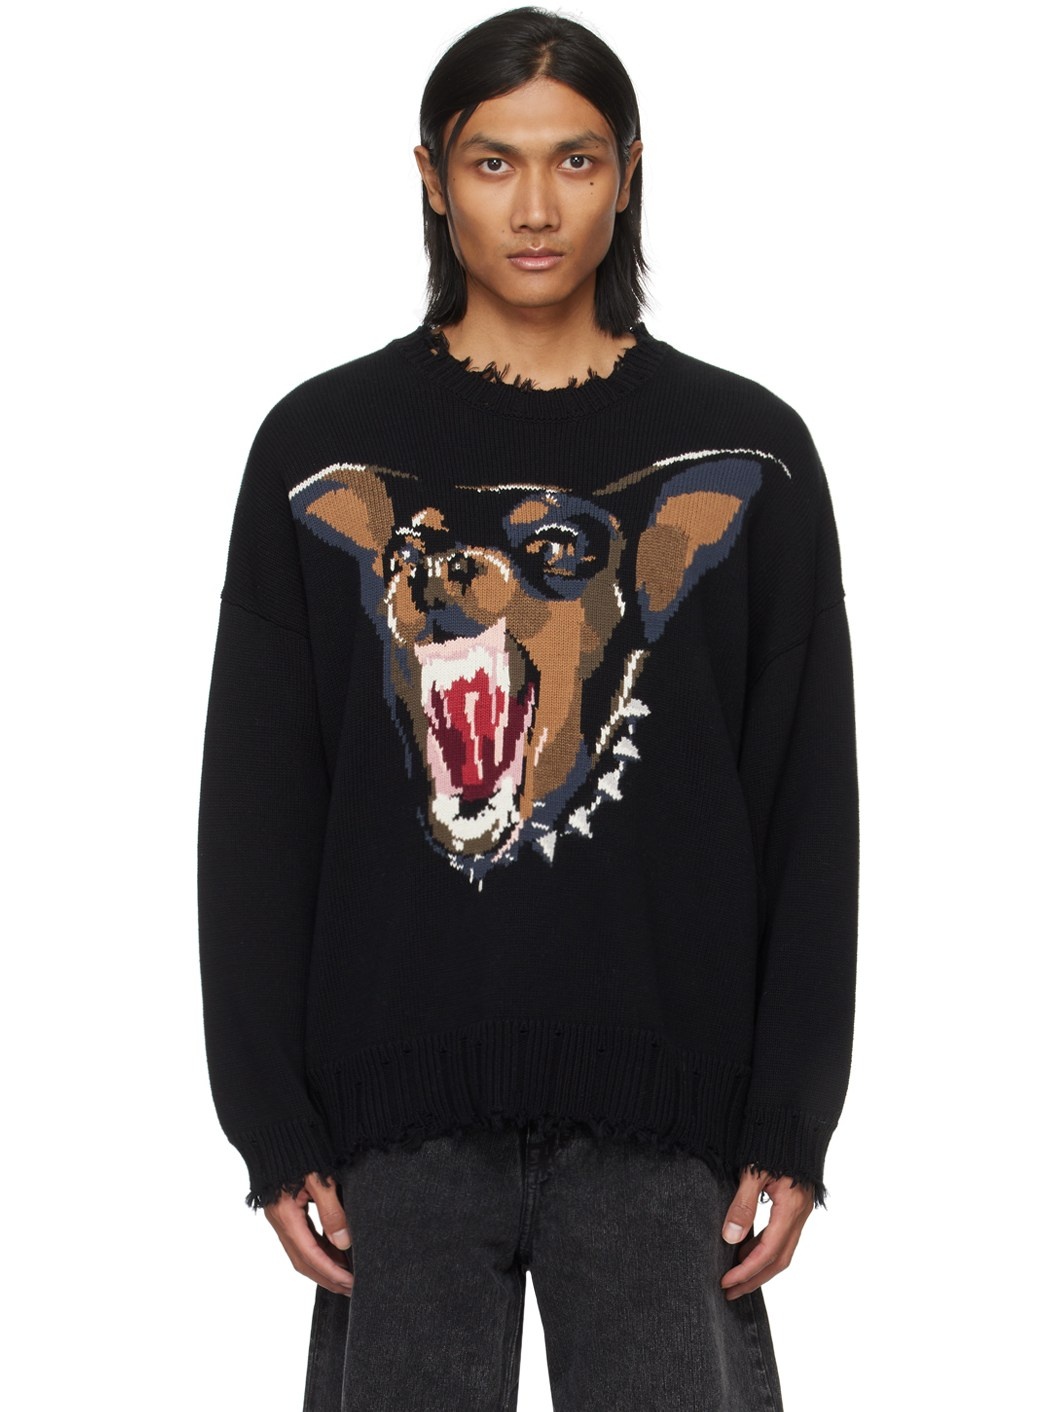 Black Angry Chihuahua Sweater - 1